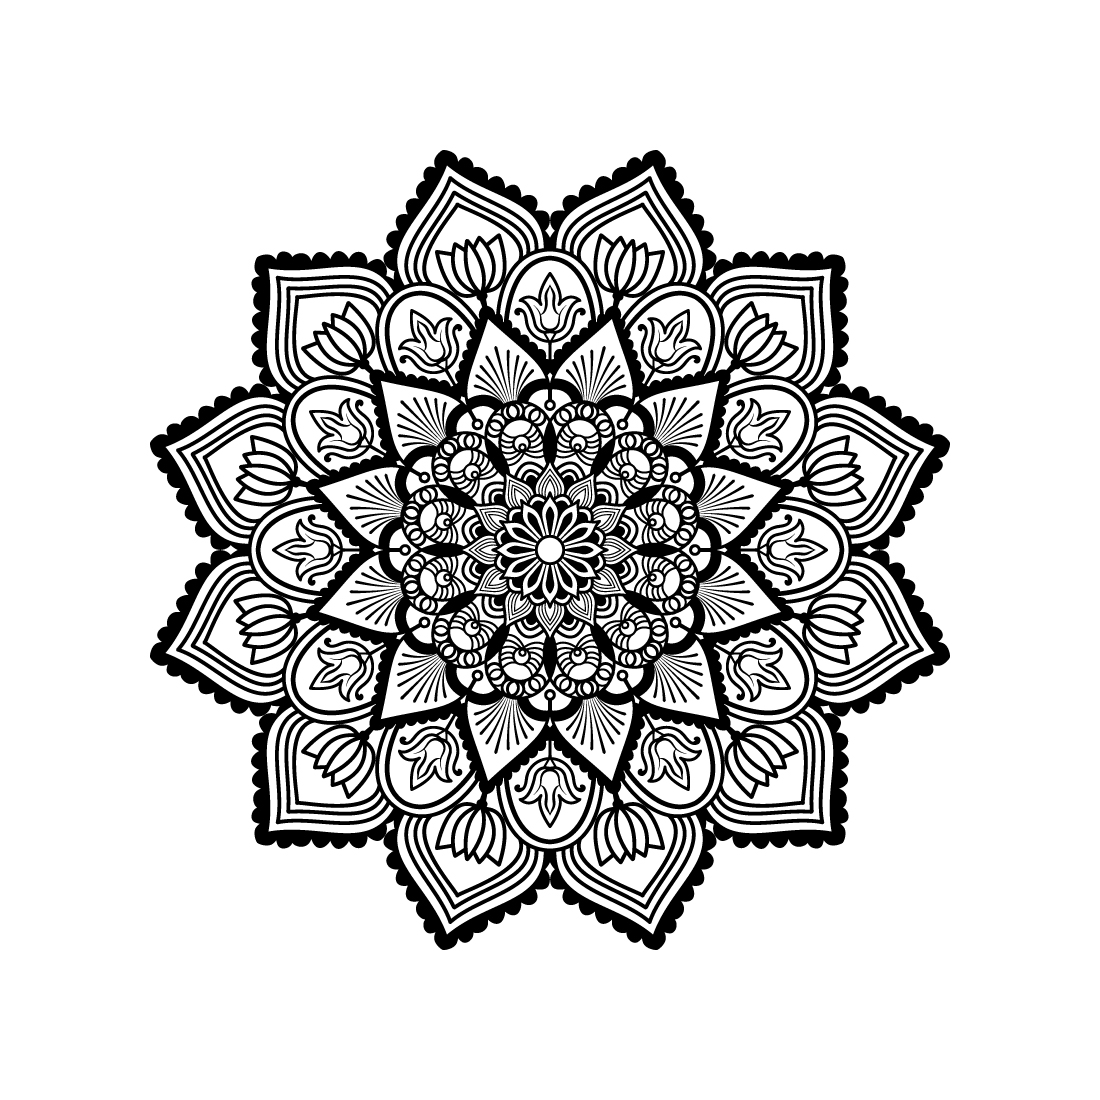 Bundle of 10 Meditation Mandala for Paper Cutting or Coloring Book Pages preview image.